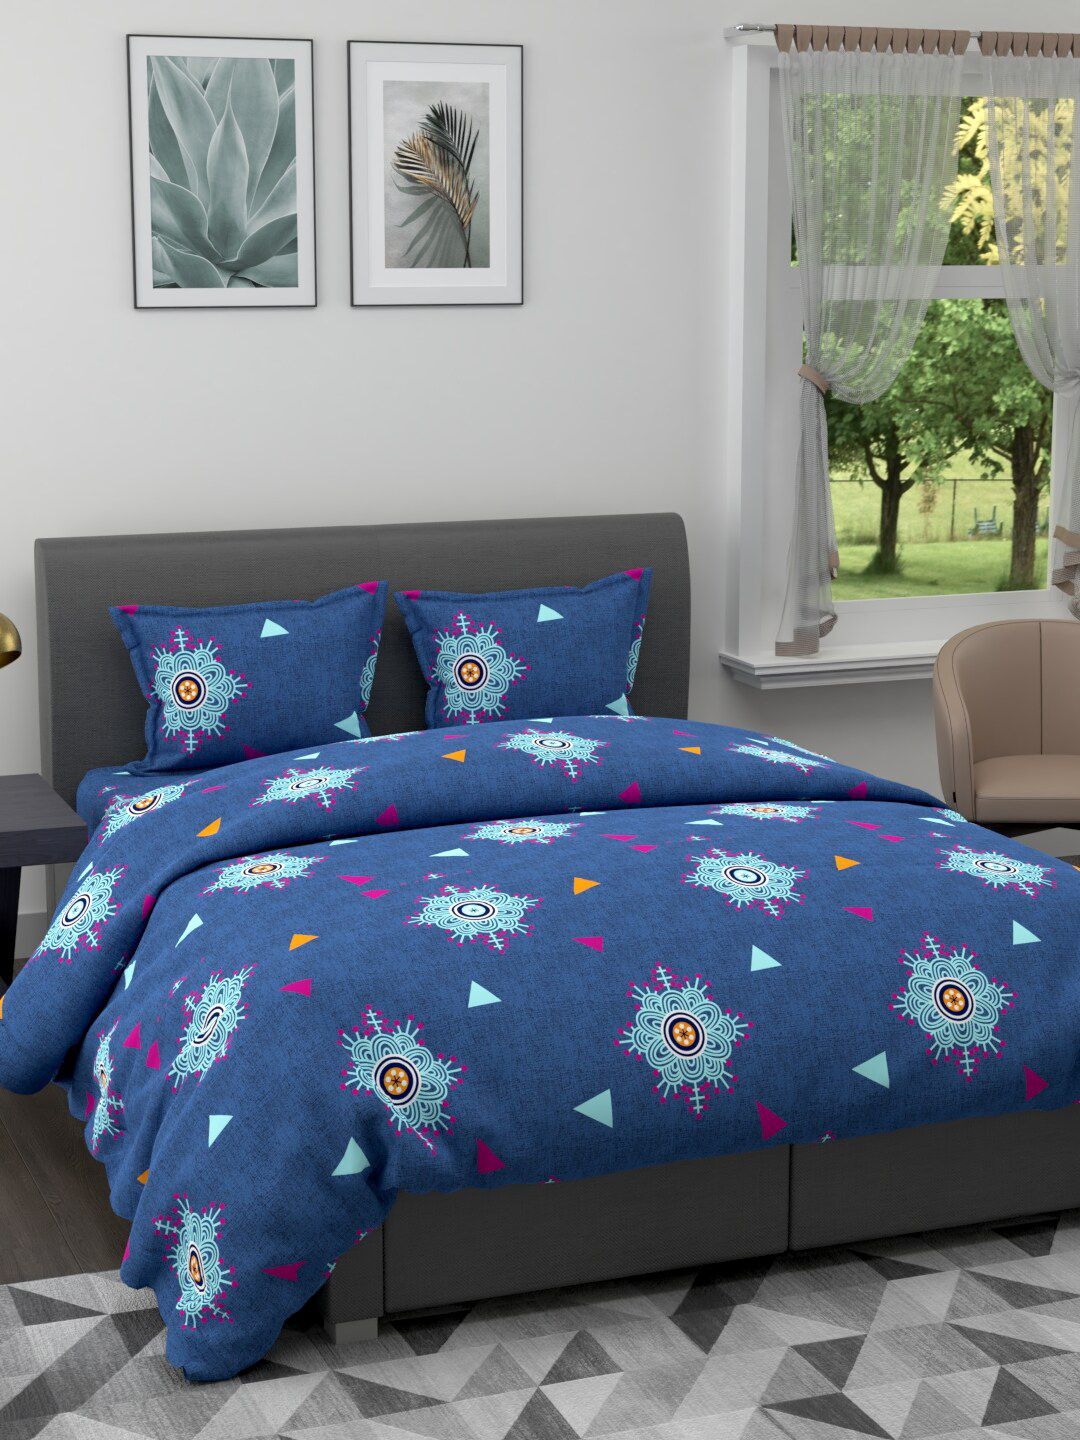 BIANCA Set Of 4 Navy Blue Ethnic Motifs Printed Cotton 150 GSM Double King Bedding Set Price in India